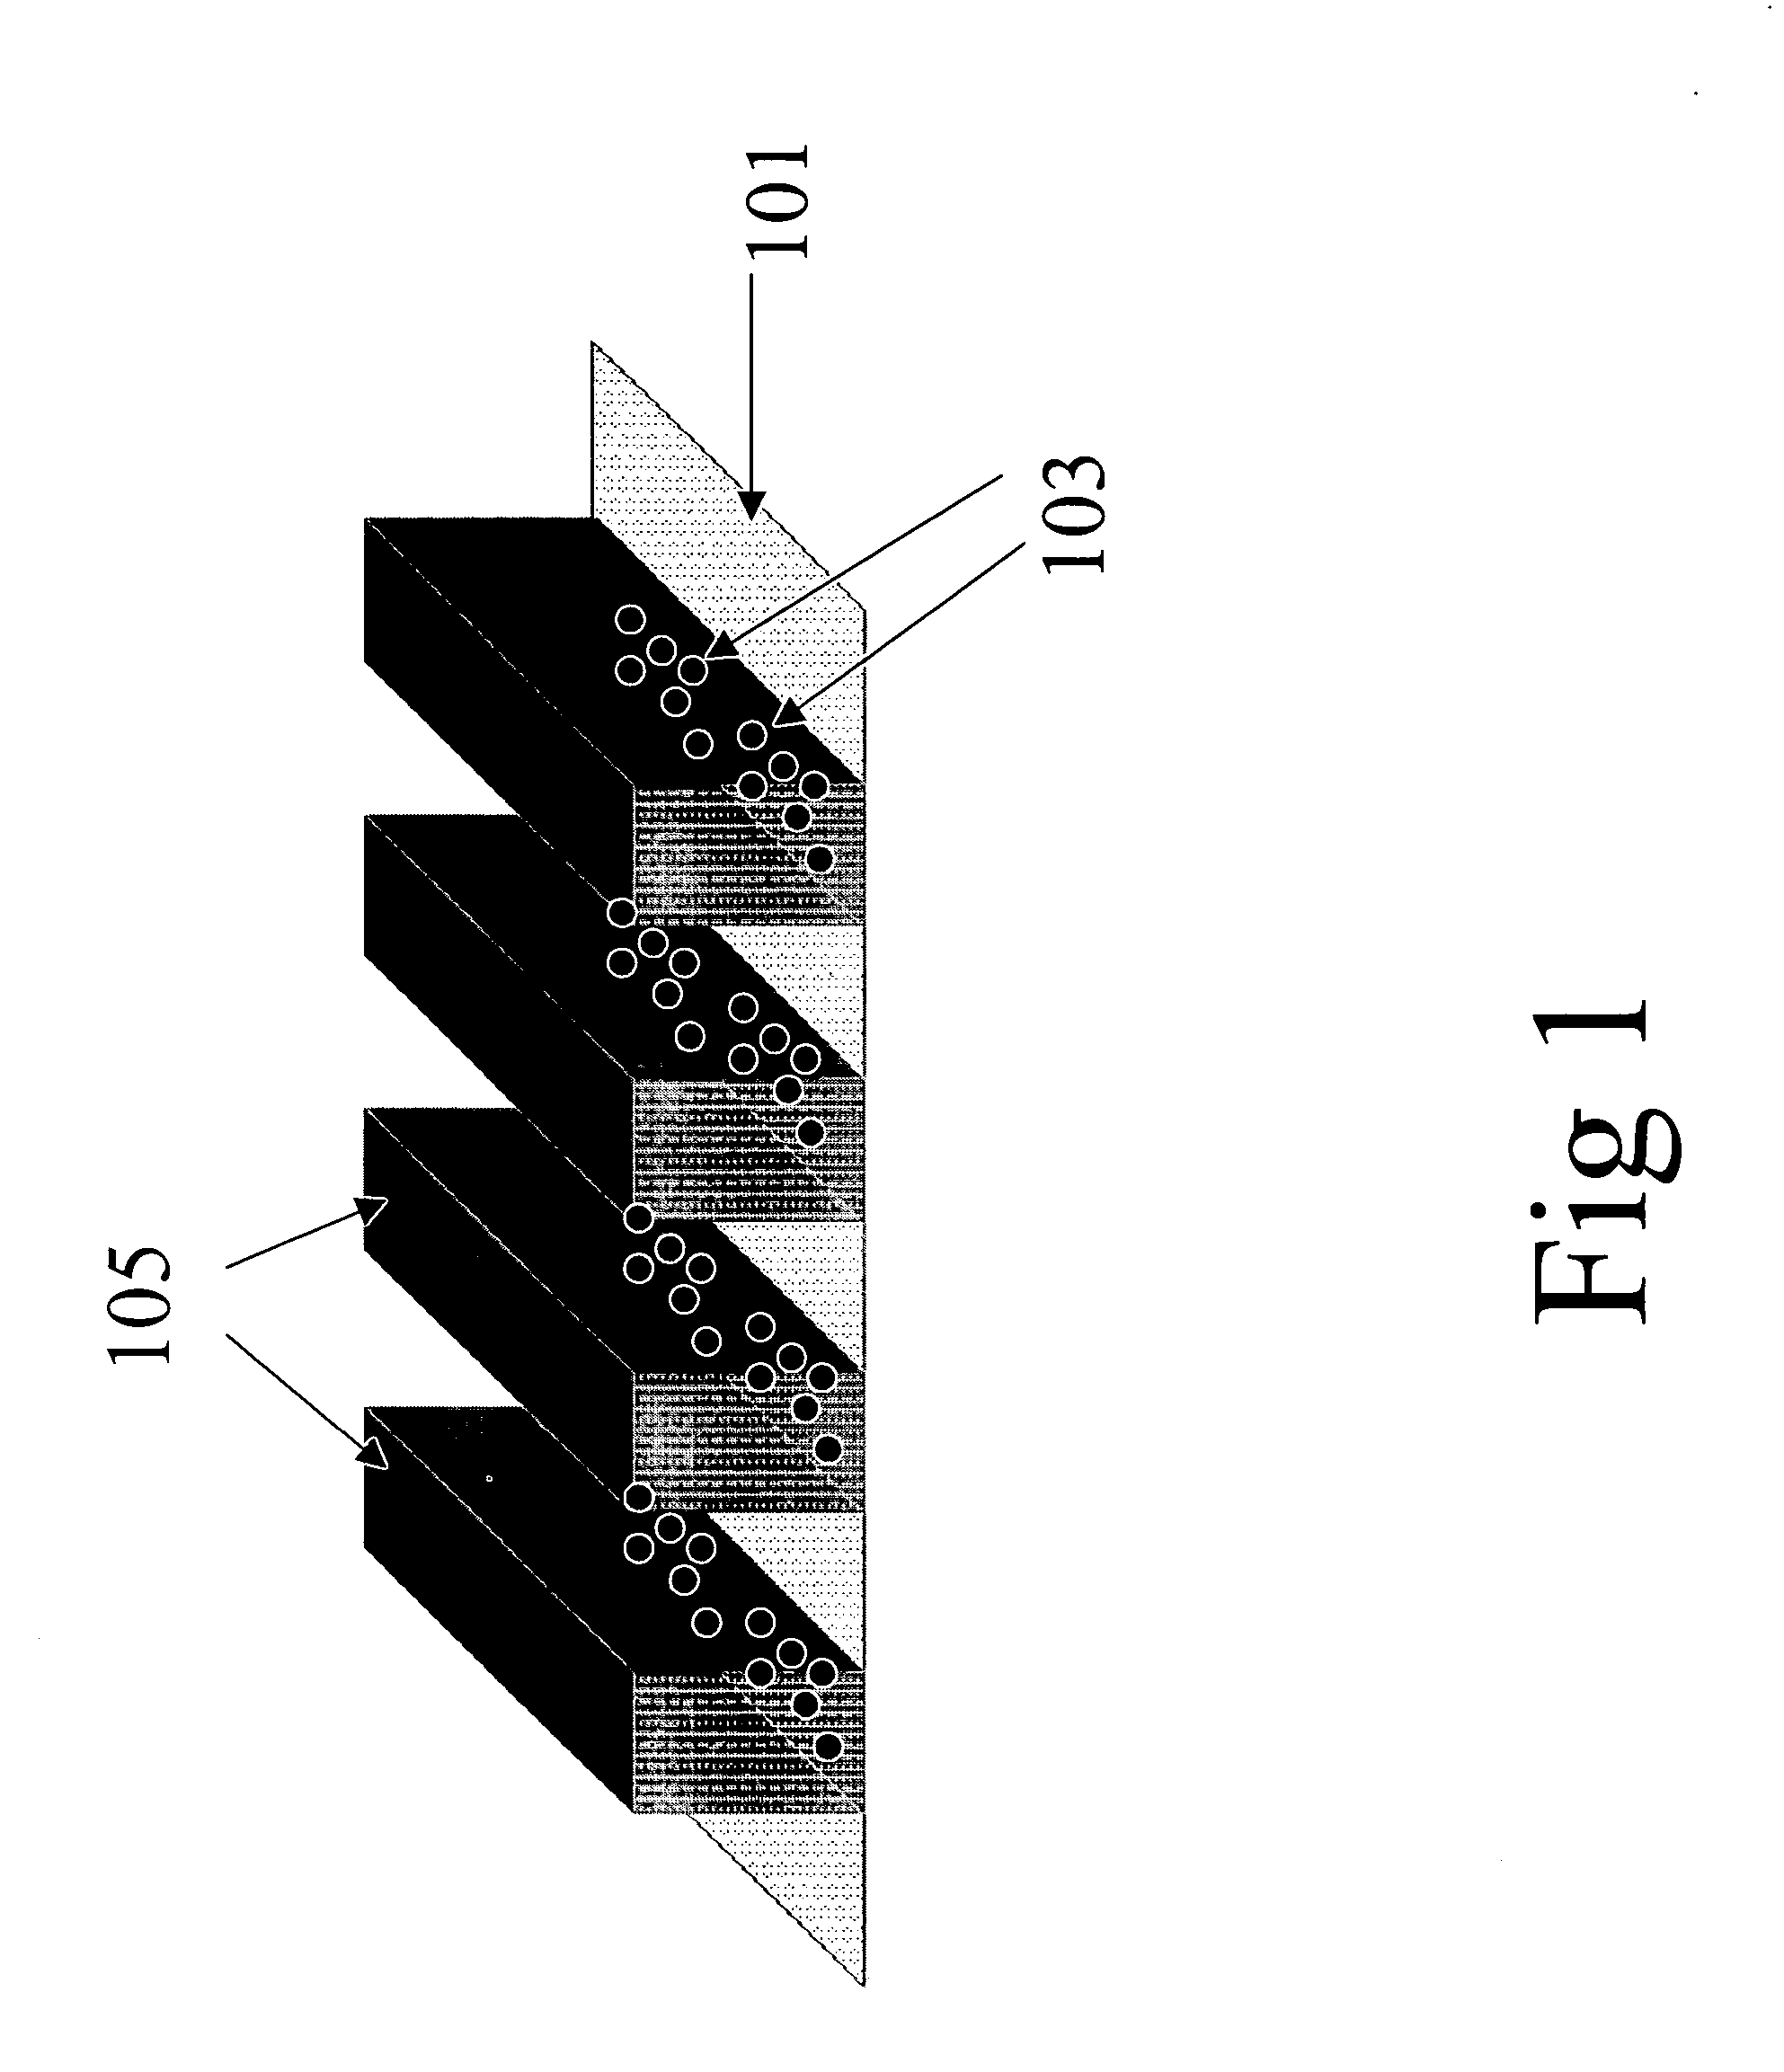 Materials and methods for creating imaging layers